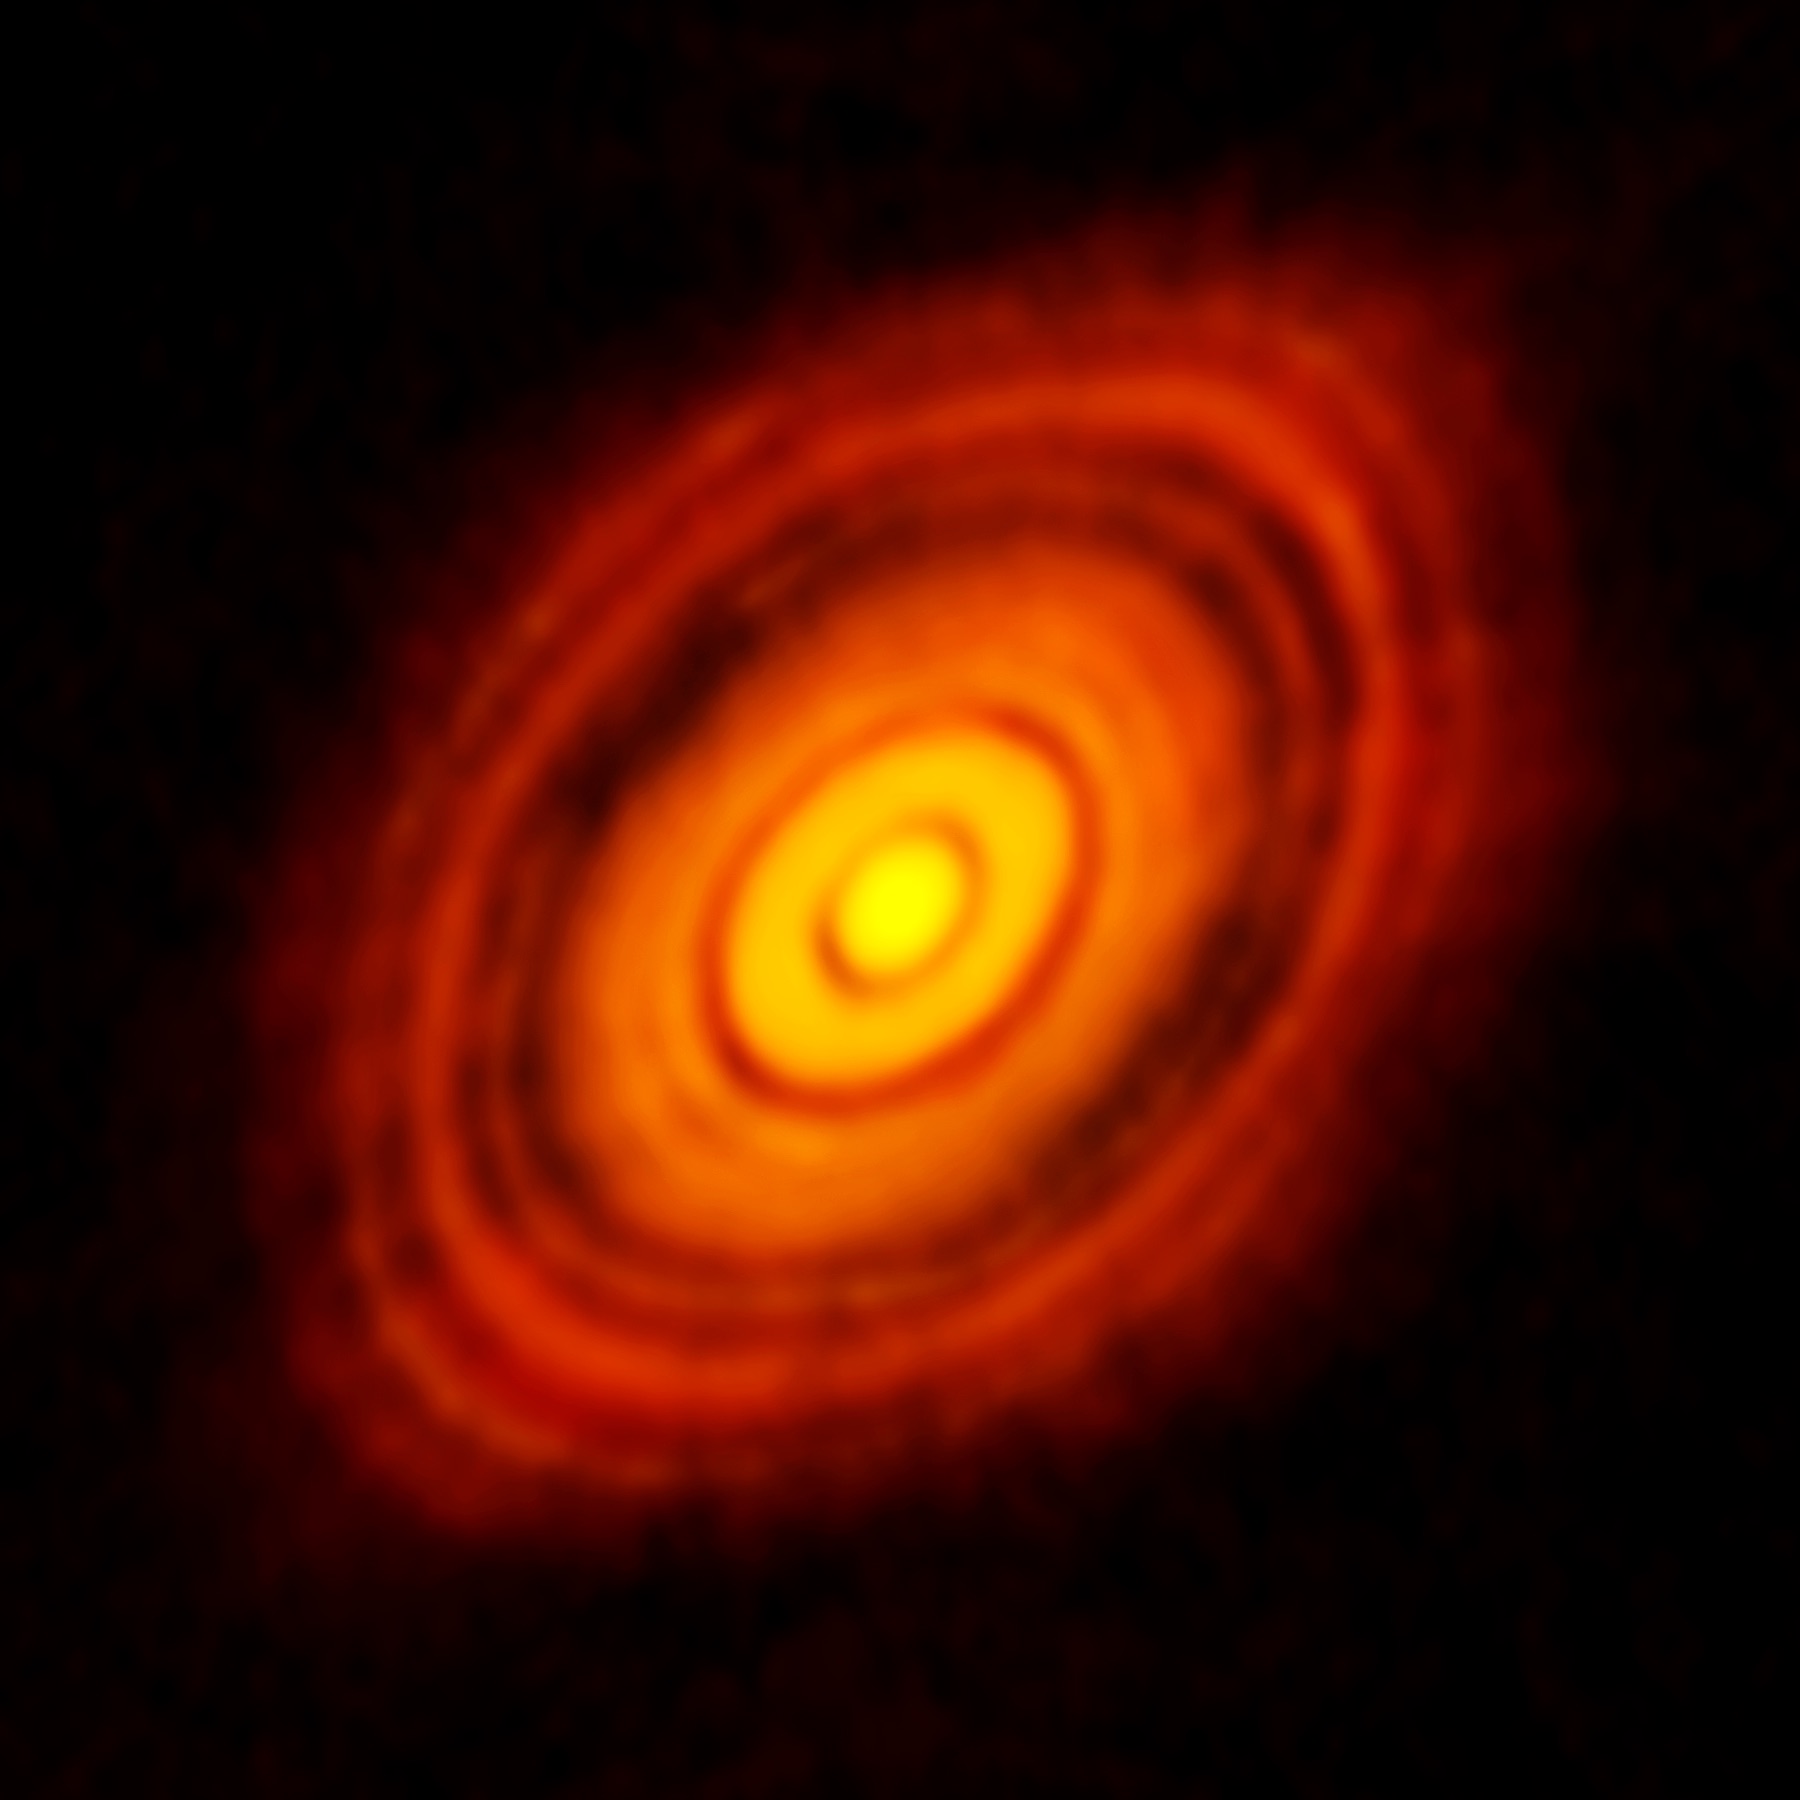 This is the sharpest image ever taken by ALMA — sharper than is routinely achieved in visible light with the NASA/ESA Hubble Space Telescope. It shows the protoplanetary disc surrounding the young star HL Tauri. These new ALMA observations reveal substructures within the disc that have never been seen before and even show the possible positions of planets forming in the dark patches within the system.